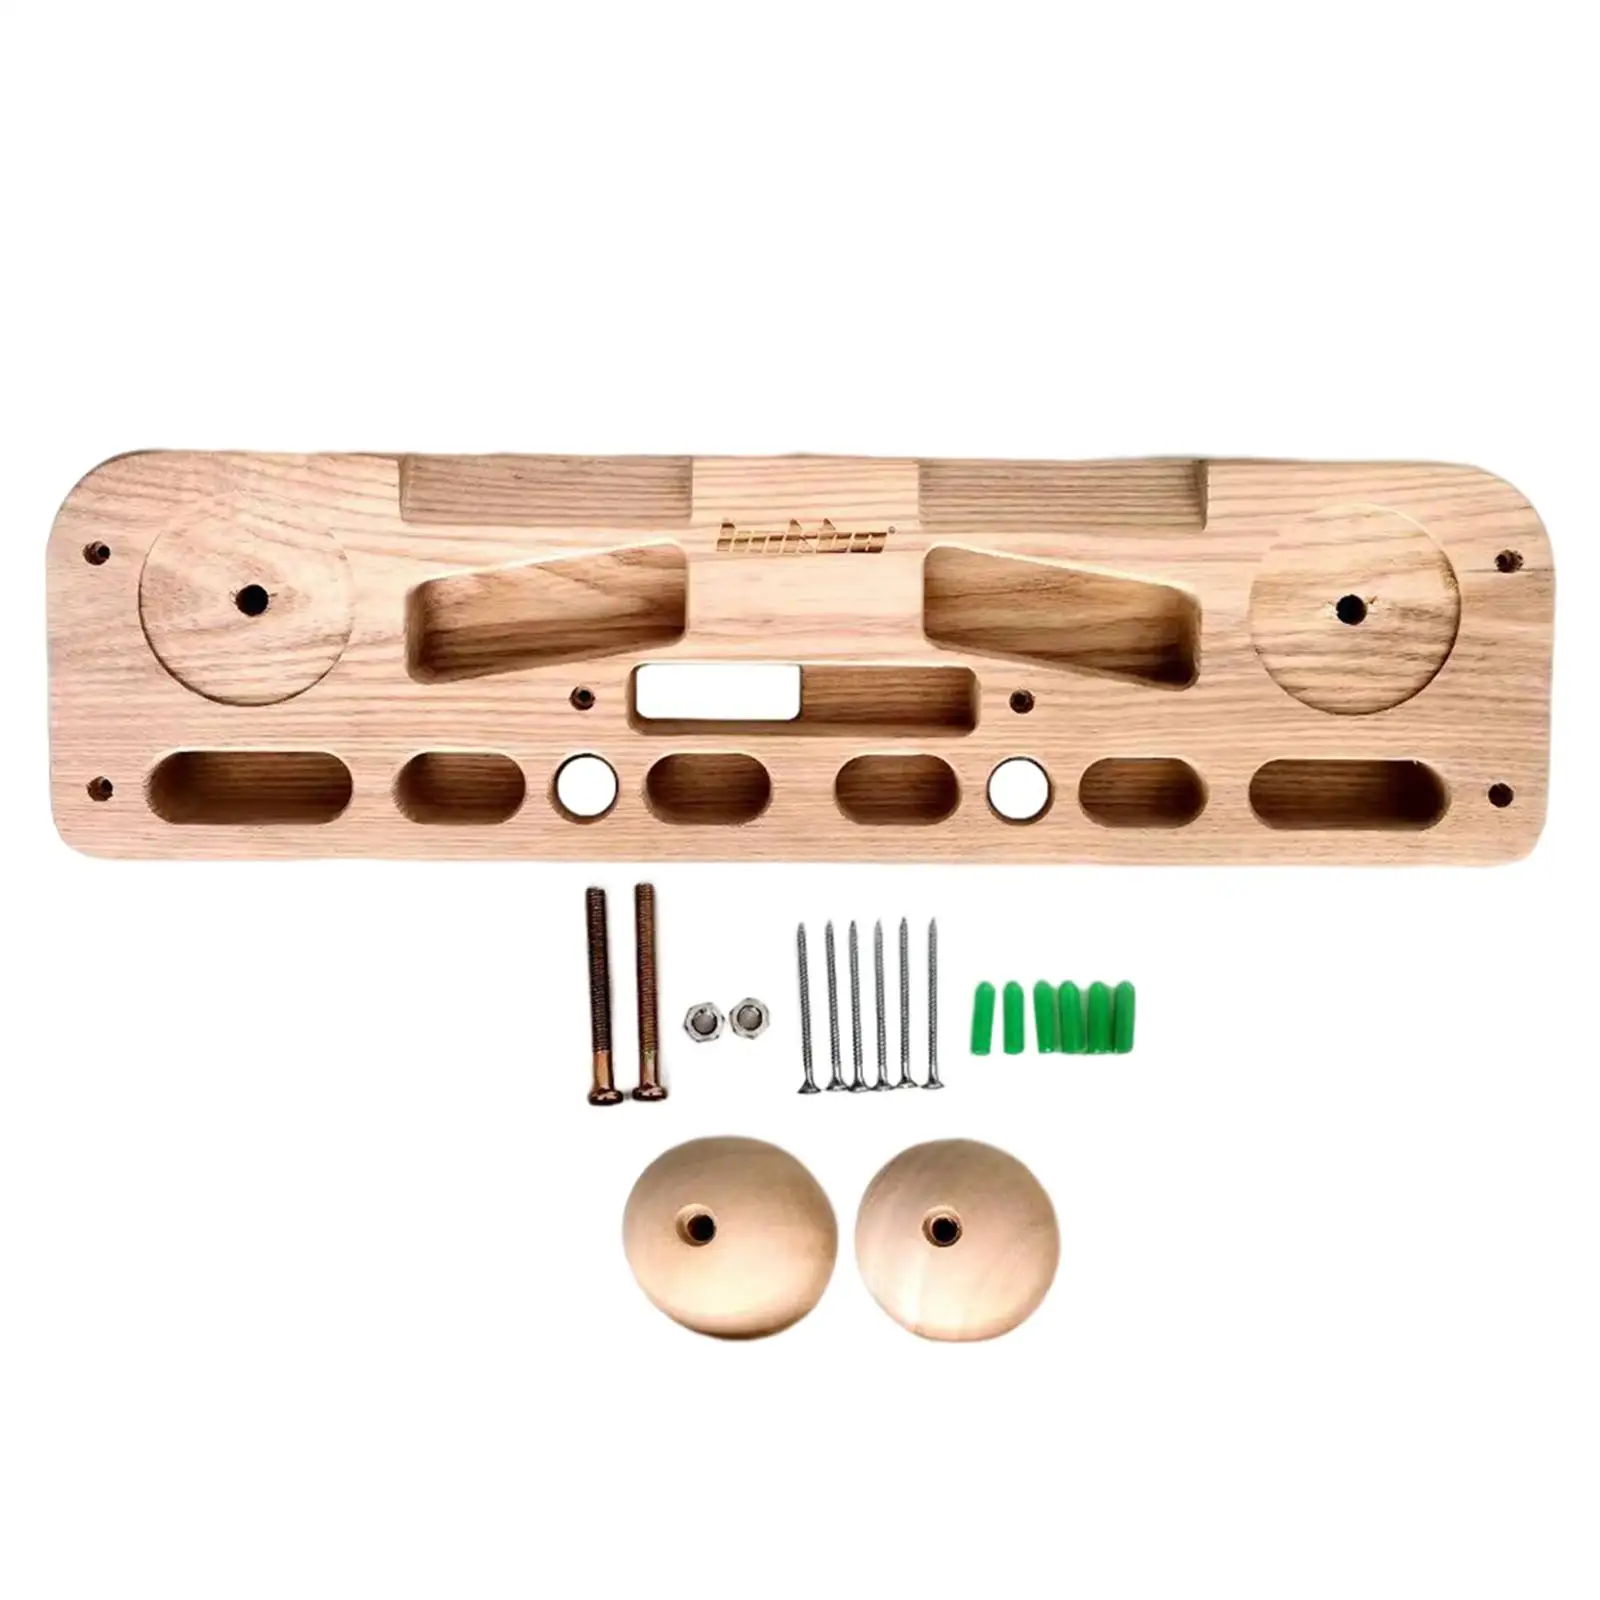 Portable Hangboard Finger Strengthener Training Finger Grip Strengthen Your Grips, Arms and More Wooden Hang Board for Indoor